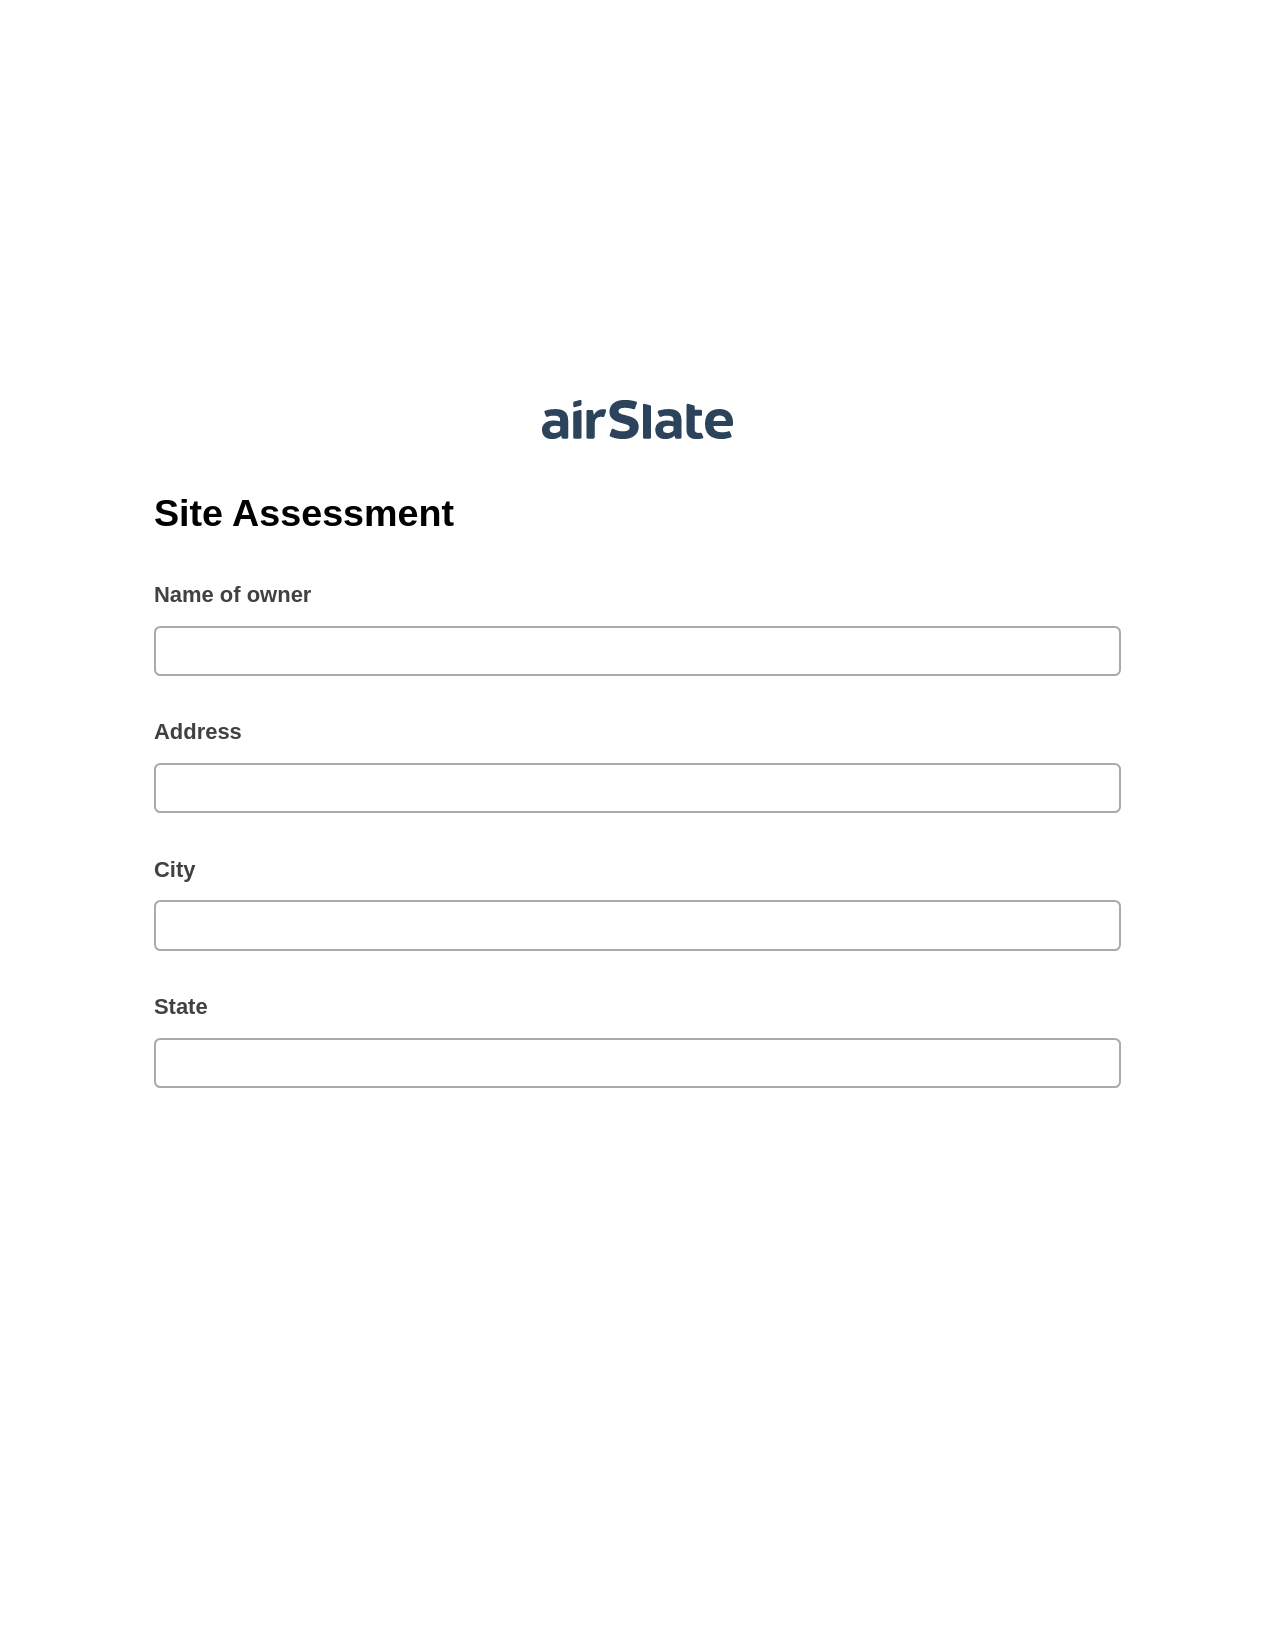 Multirole Site Assessment Pre-fill from CSV File Bot, Webhook Bot, Export to Salesforce Bot